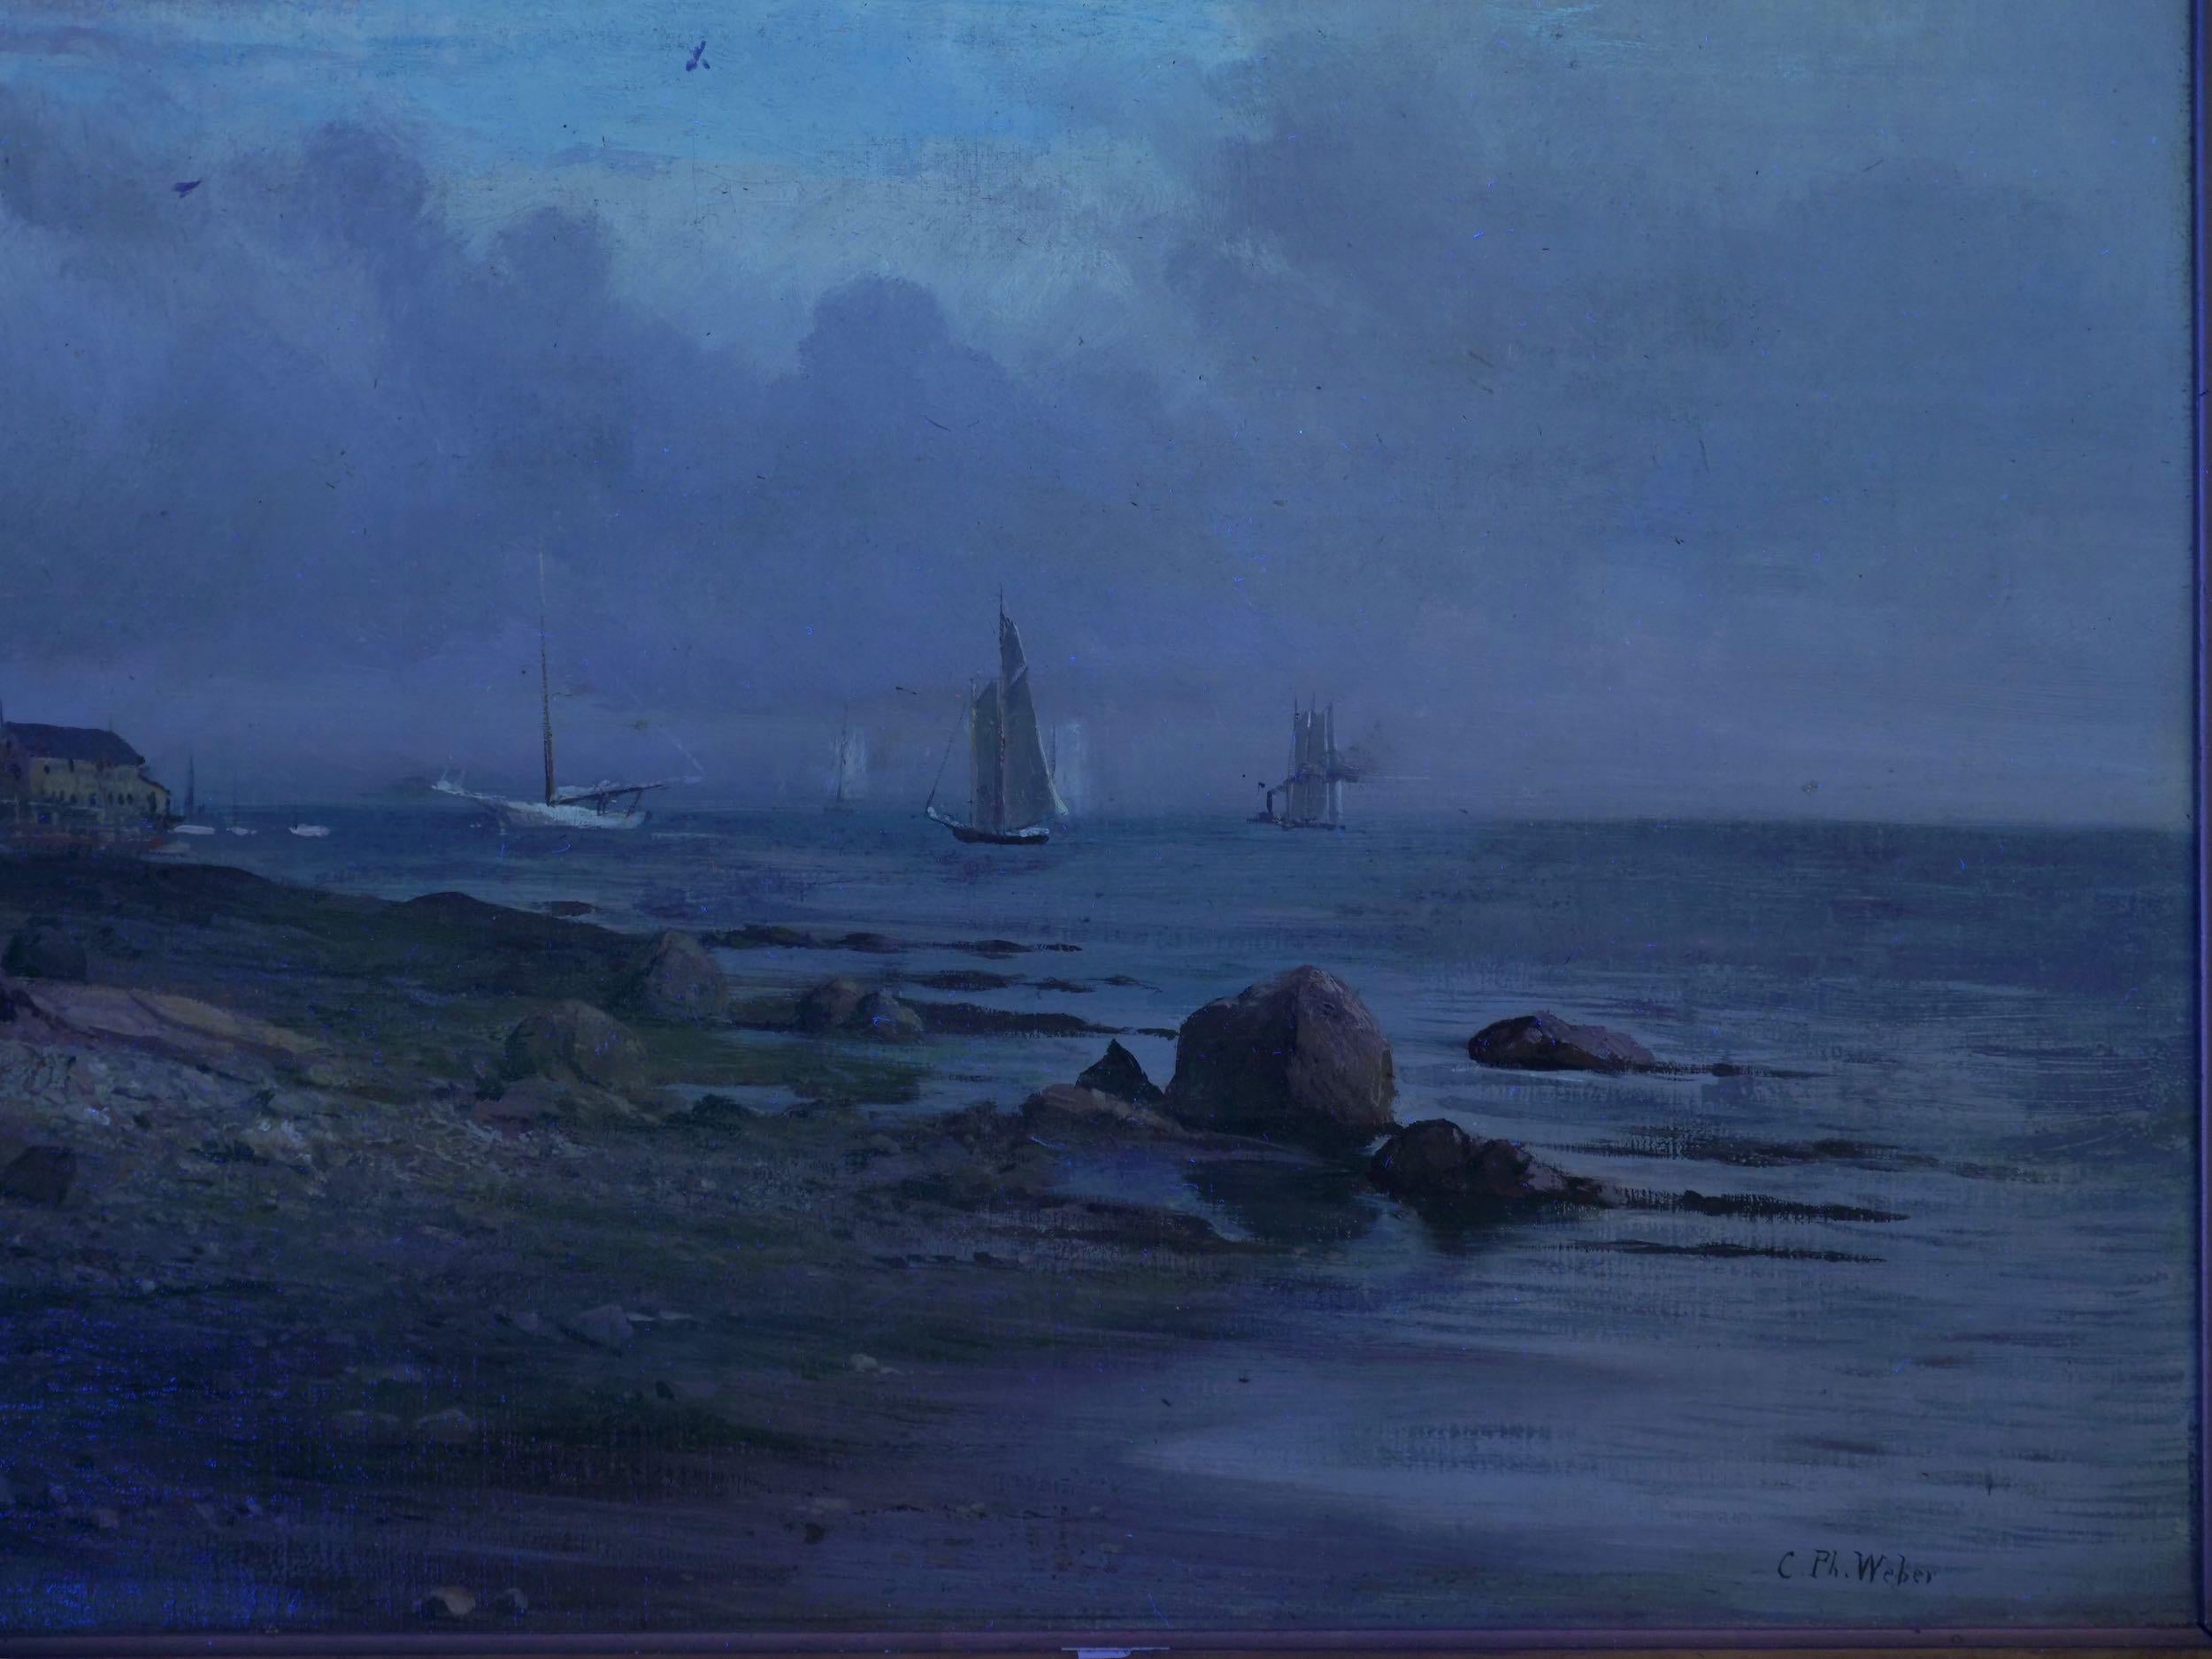 American Landscape Painting “Boats off a Rocky Coast” by Carl Philipp Weber 8